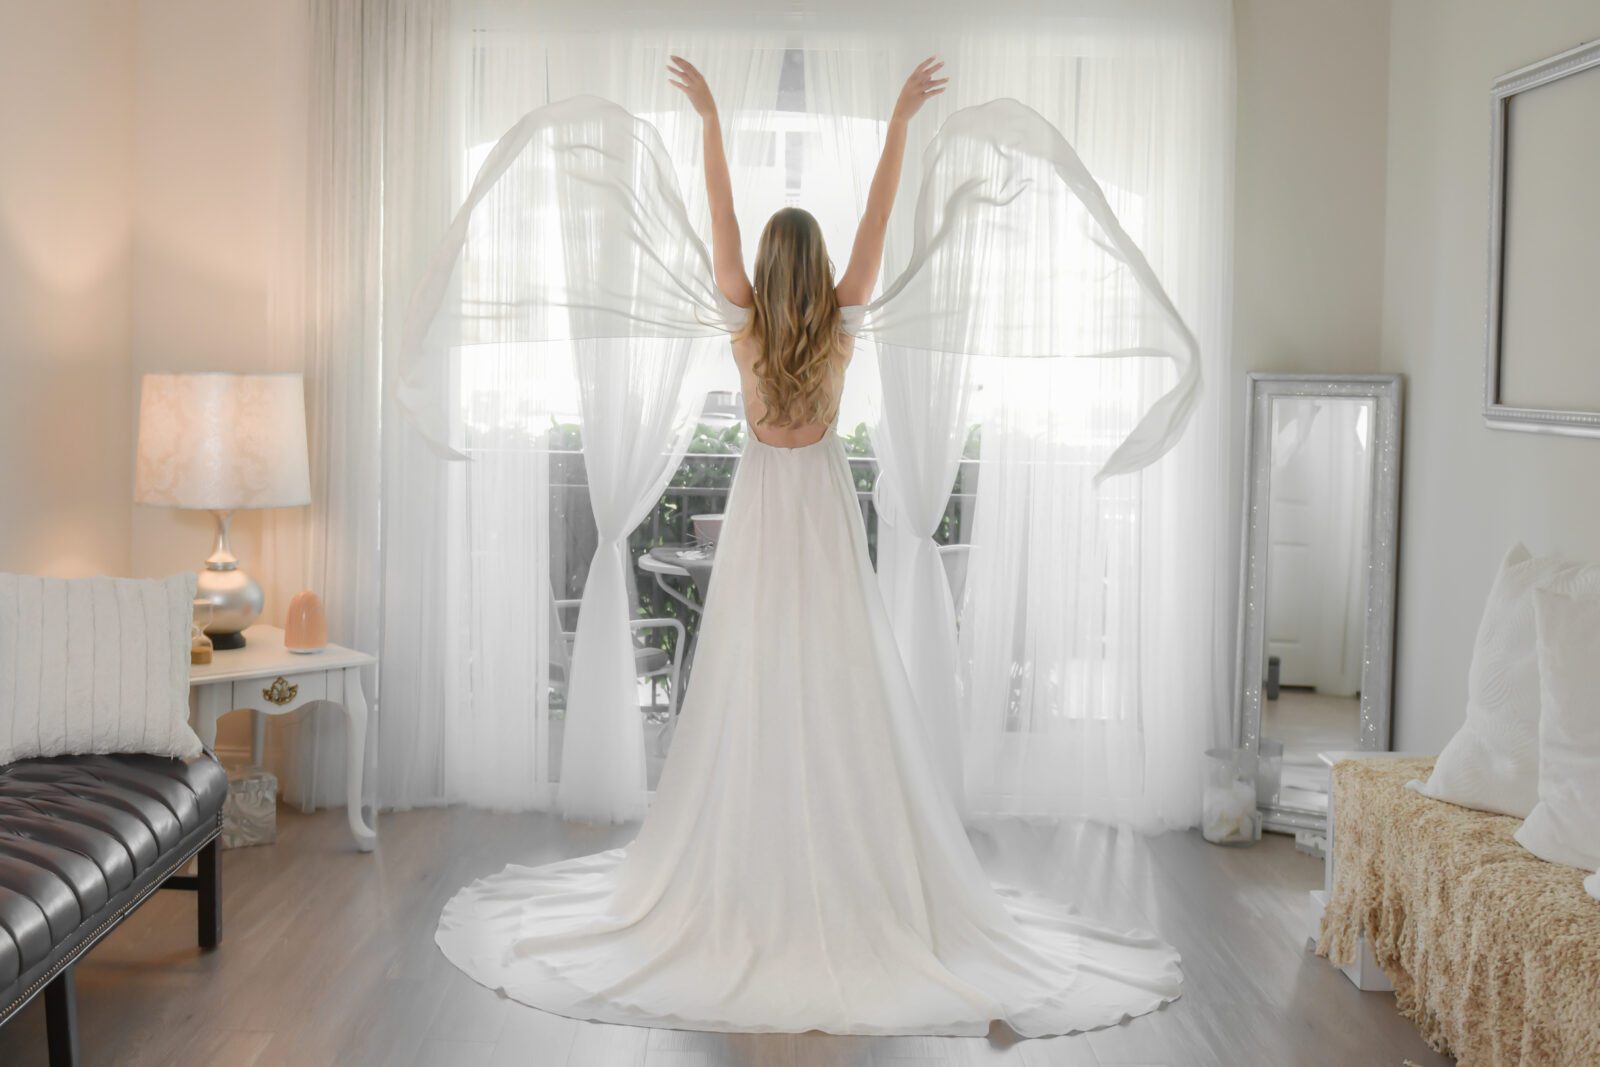 A bride in an Orlando custom design wedding dress standing in front of a window.